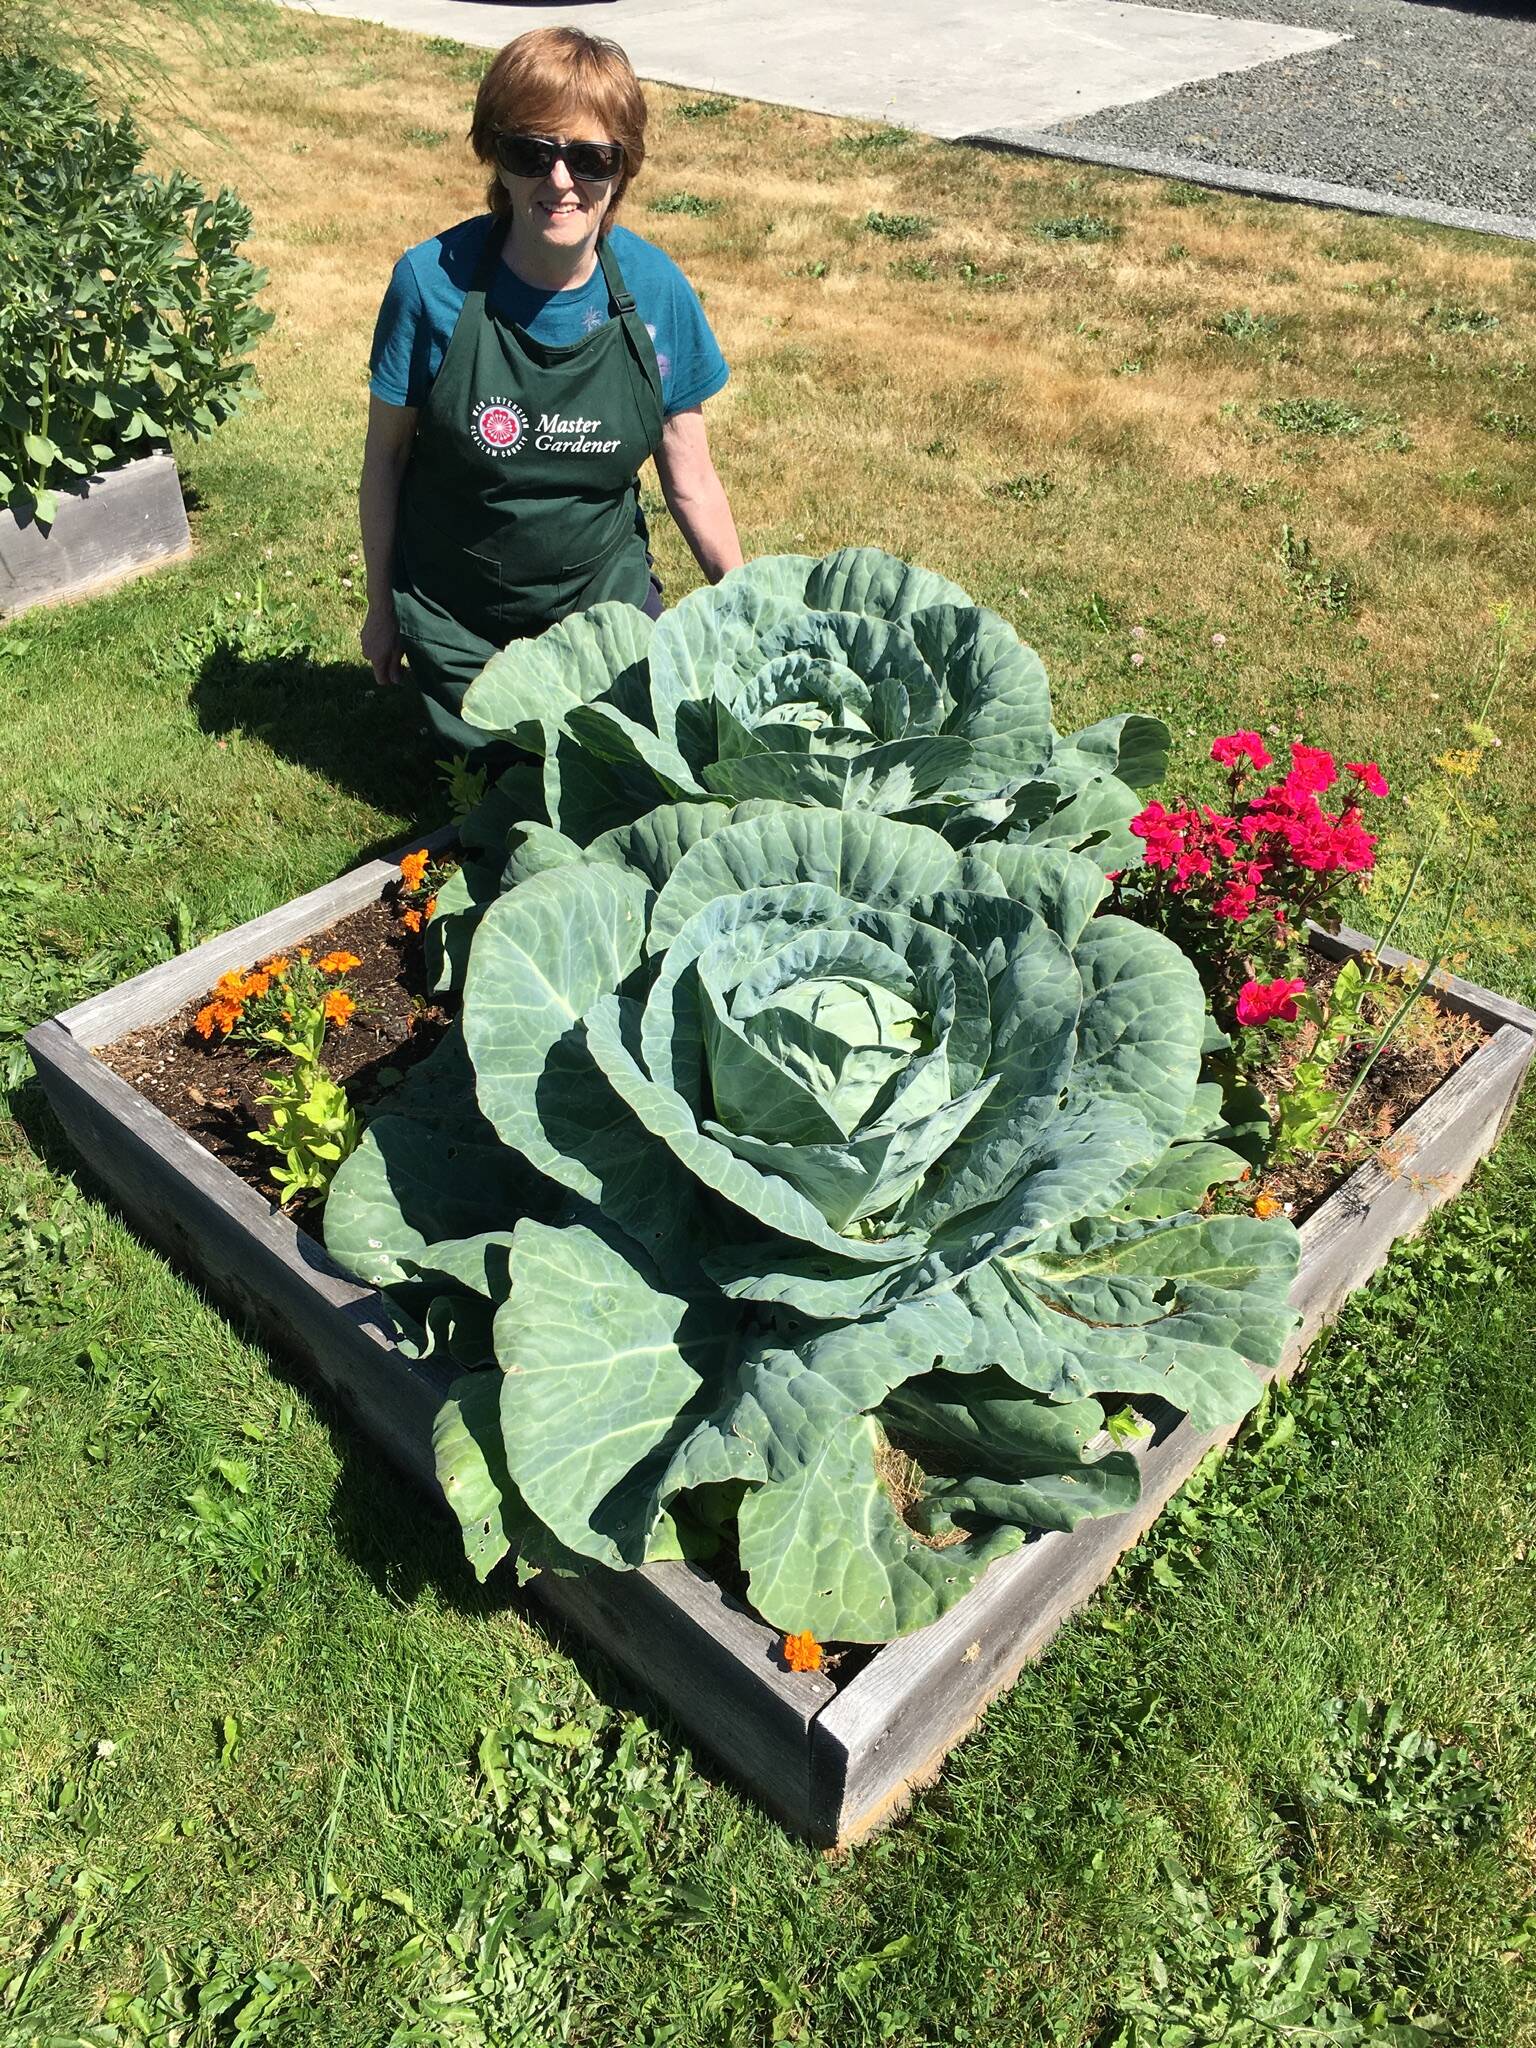 If you are a newcomer or gardening newbie, find out how to avoid common gardening pitfalls and mistakes in our mild climate. Join Master Gardener Margery Whites for the Digging Deeper Saturday presentation “Gardening for Newcomers to the North Olympic Peninsula,” Saturday, September 16, from 10:30 a.m. to 12 p.m. at the Woodcock Demonstration Garden.